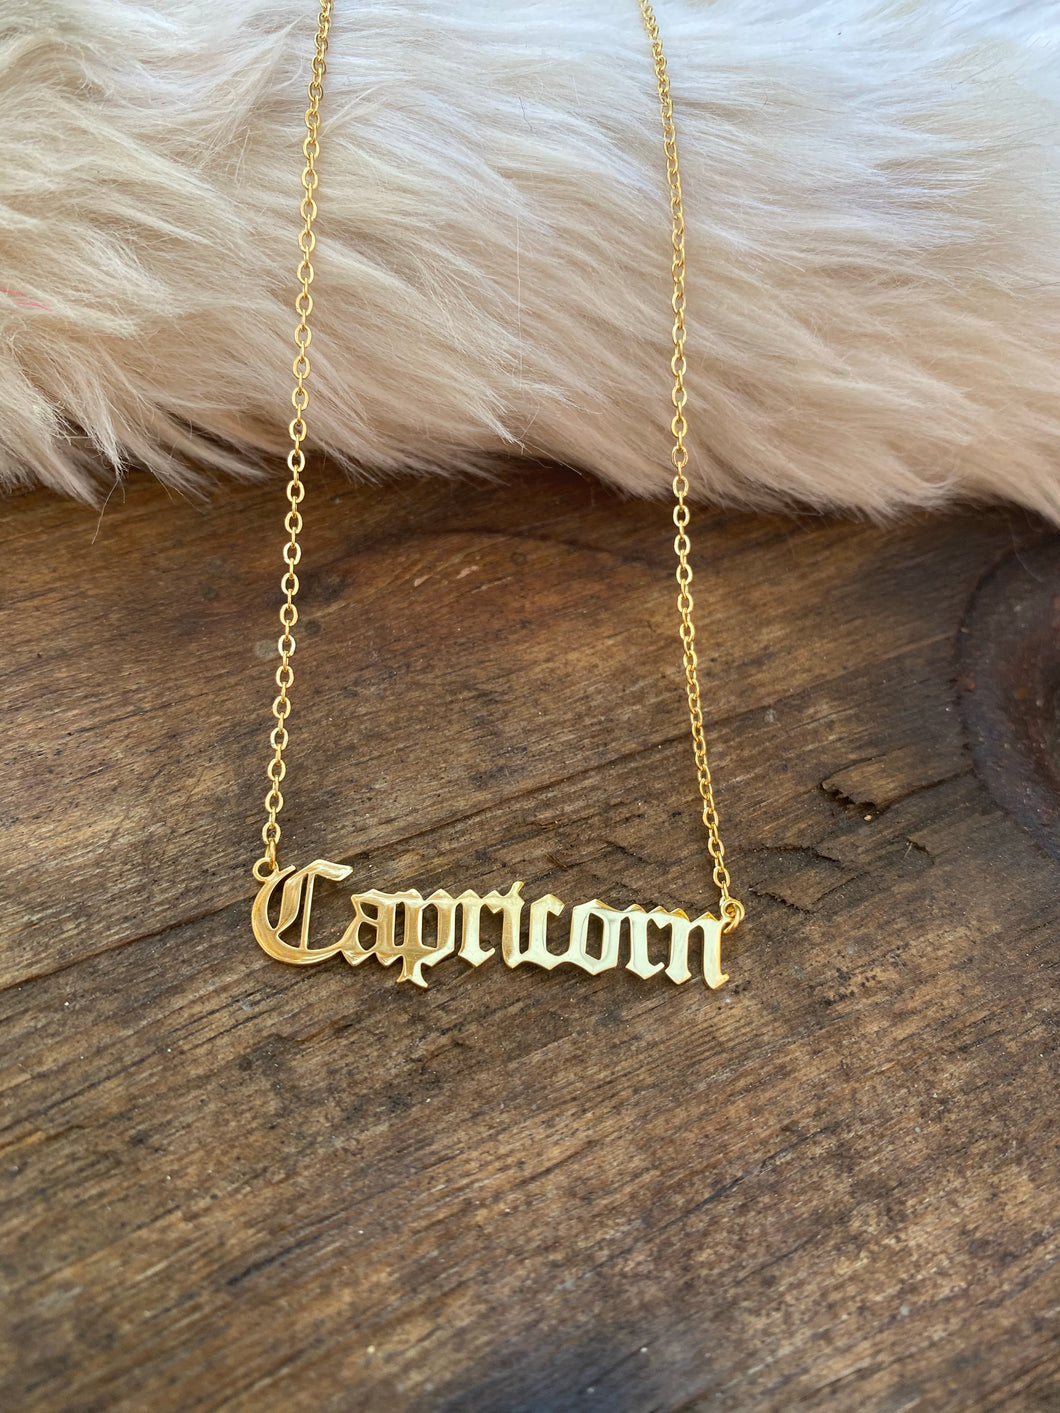 What's Your Sign? Gold over Silver Capricorn Engraved Zodiac Nameplate  Necklace - Walmart.com